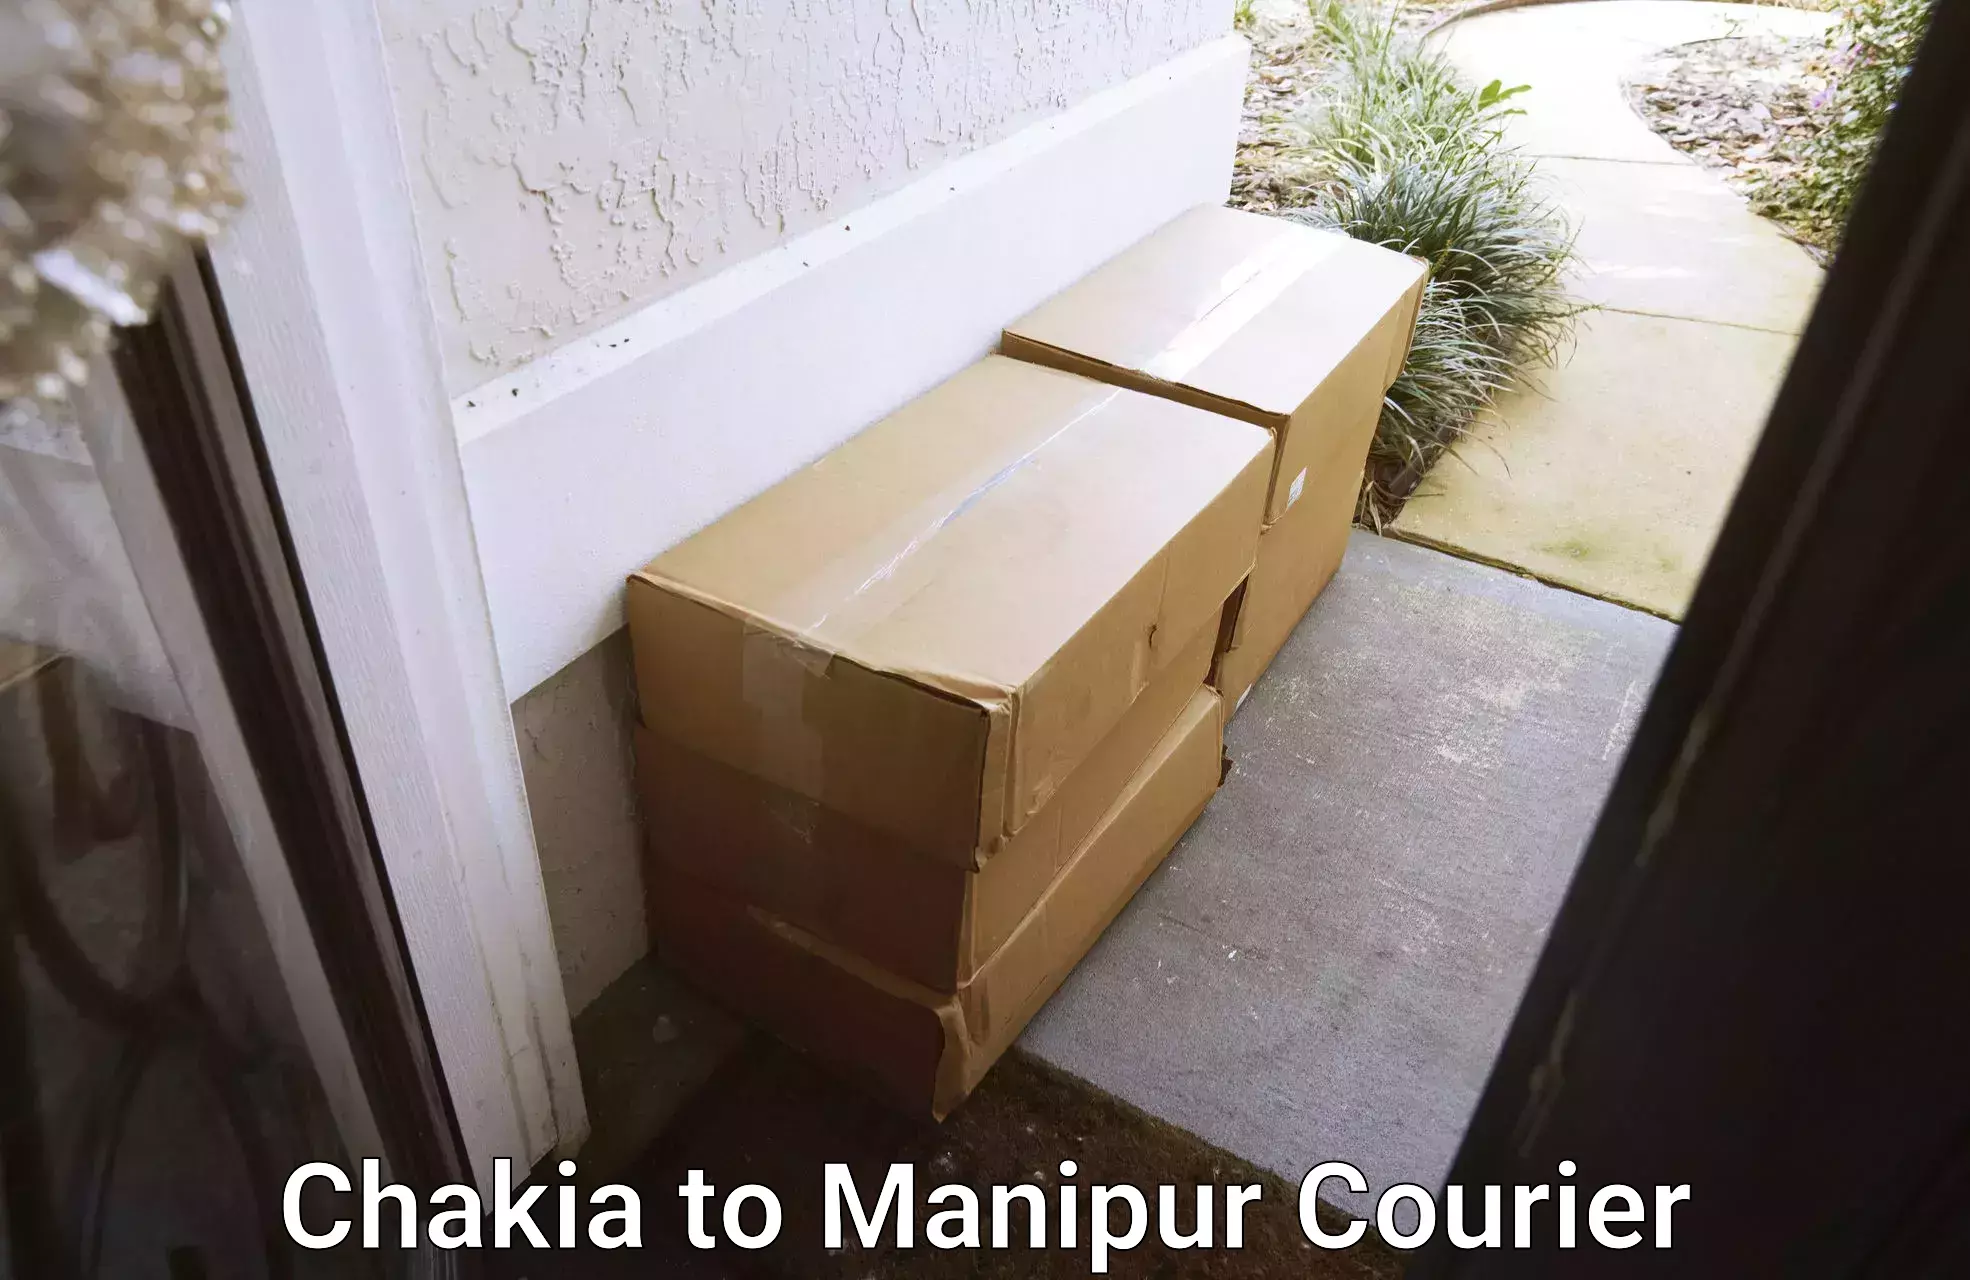 Home shifting experts Chakia to Manipur